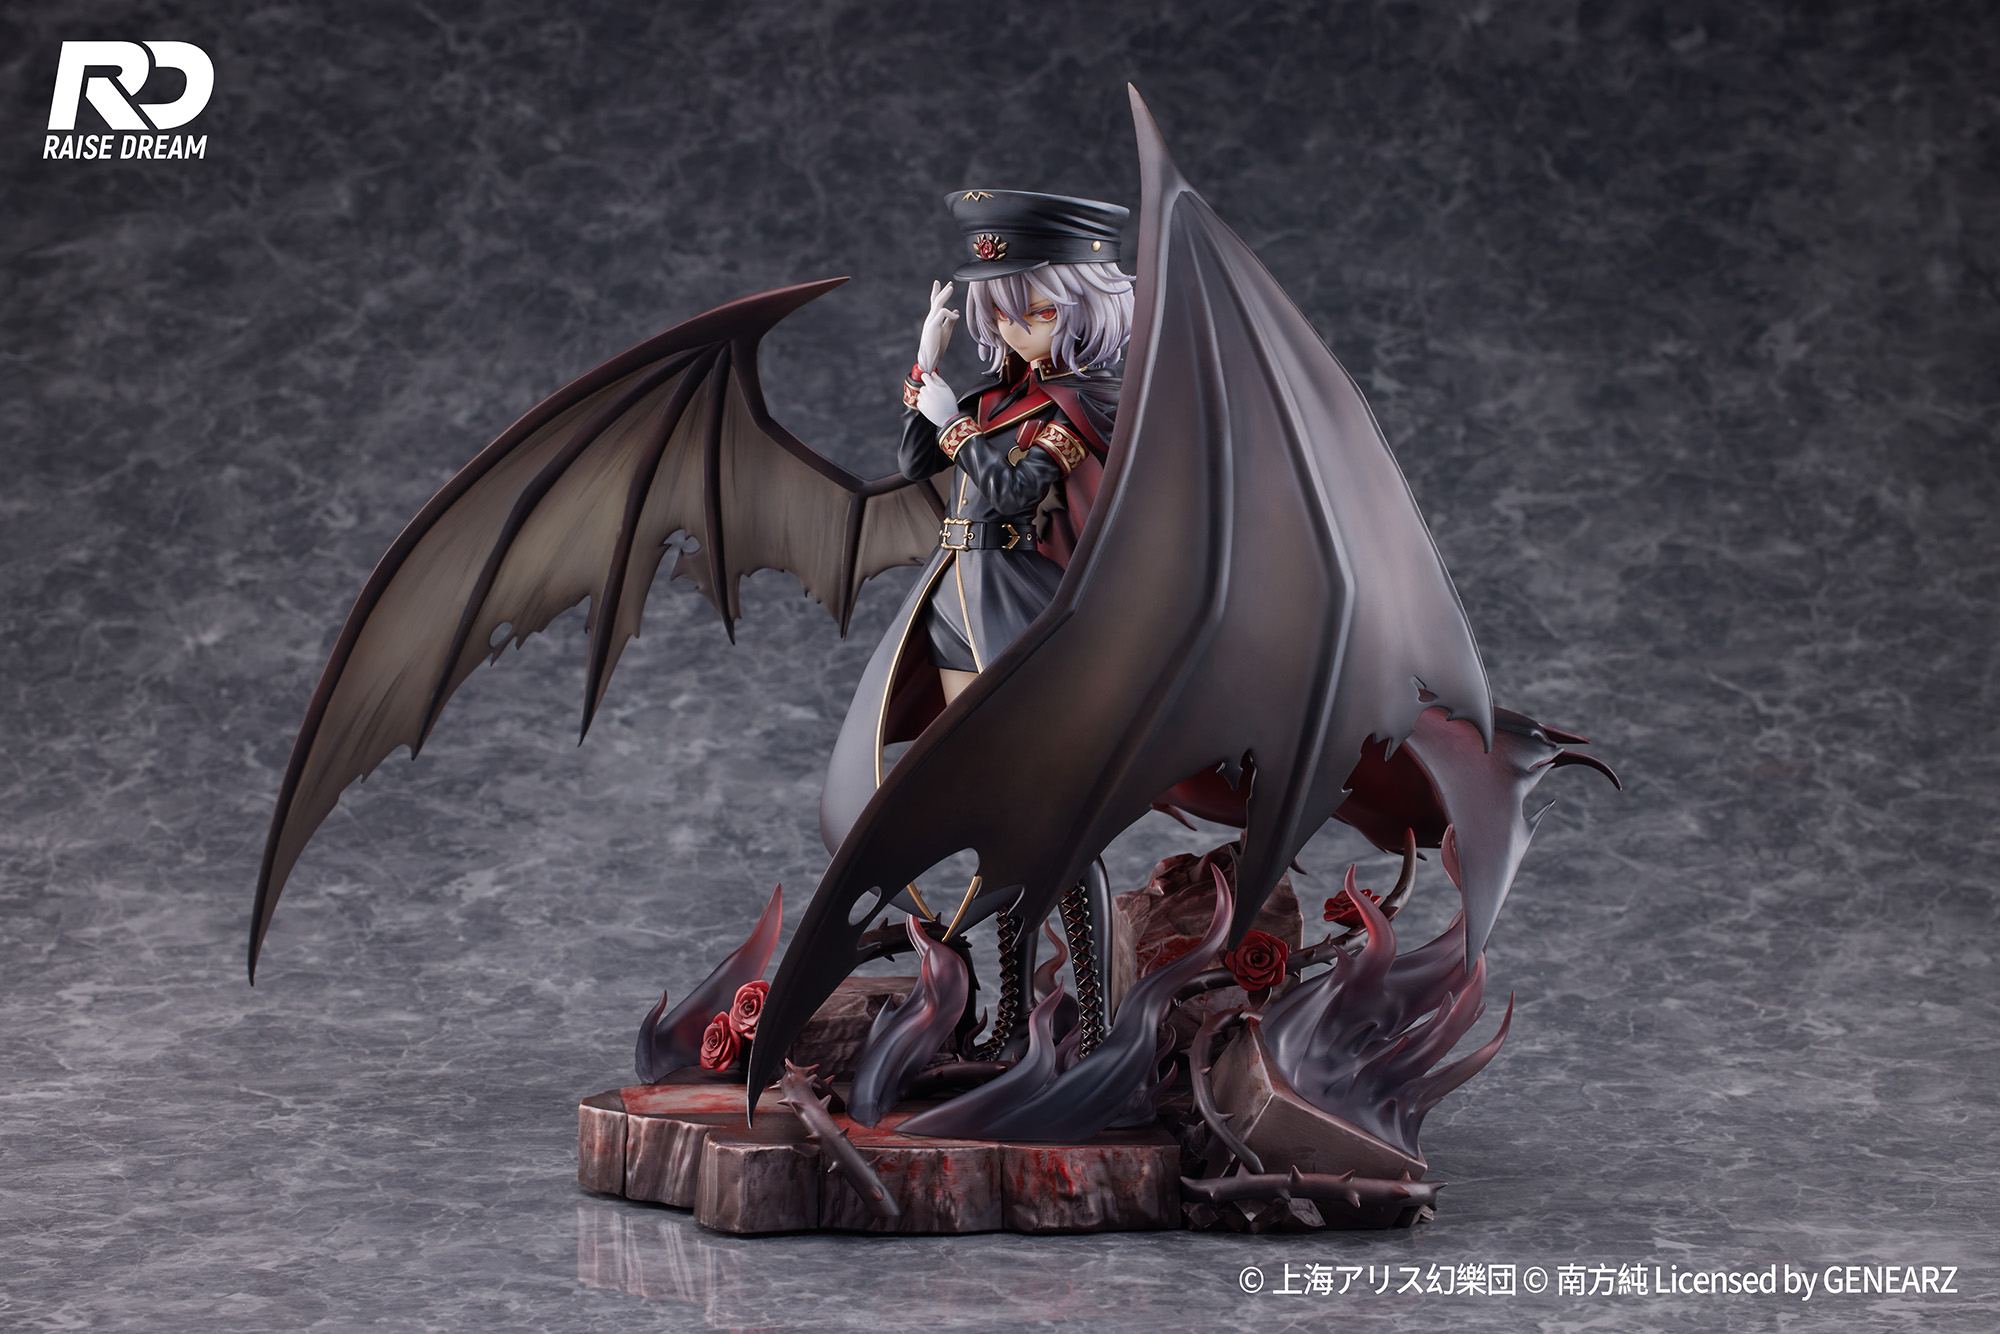 Touhou Project 1/6 Scale Pre-Painted Figure: Remilia Scarlet Military Style Ver. Illustration by Sunao Minakata RaiseDream